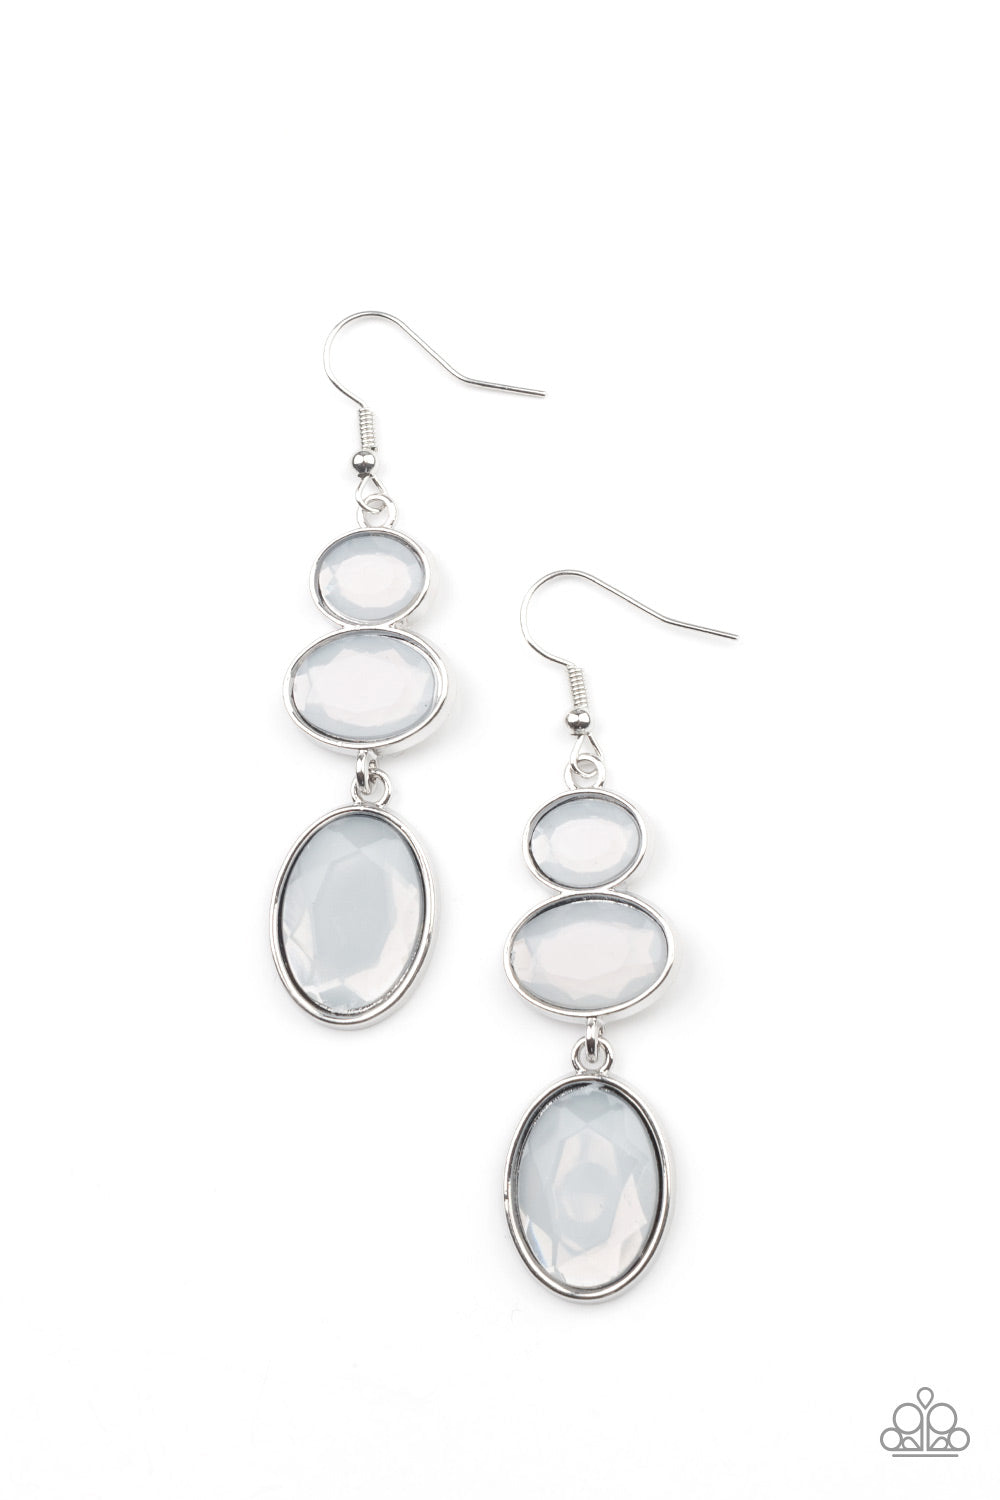 Tiers Of Tranquility - white - Paparazzi earrings